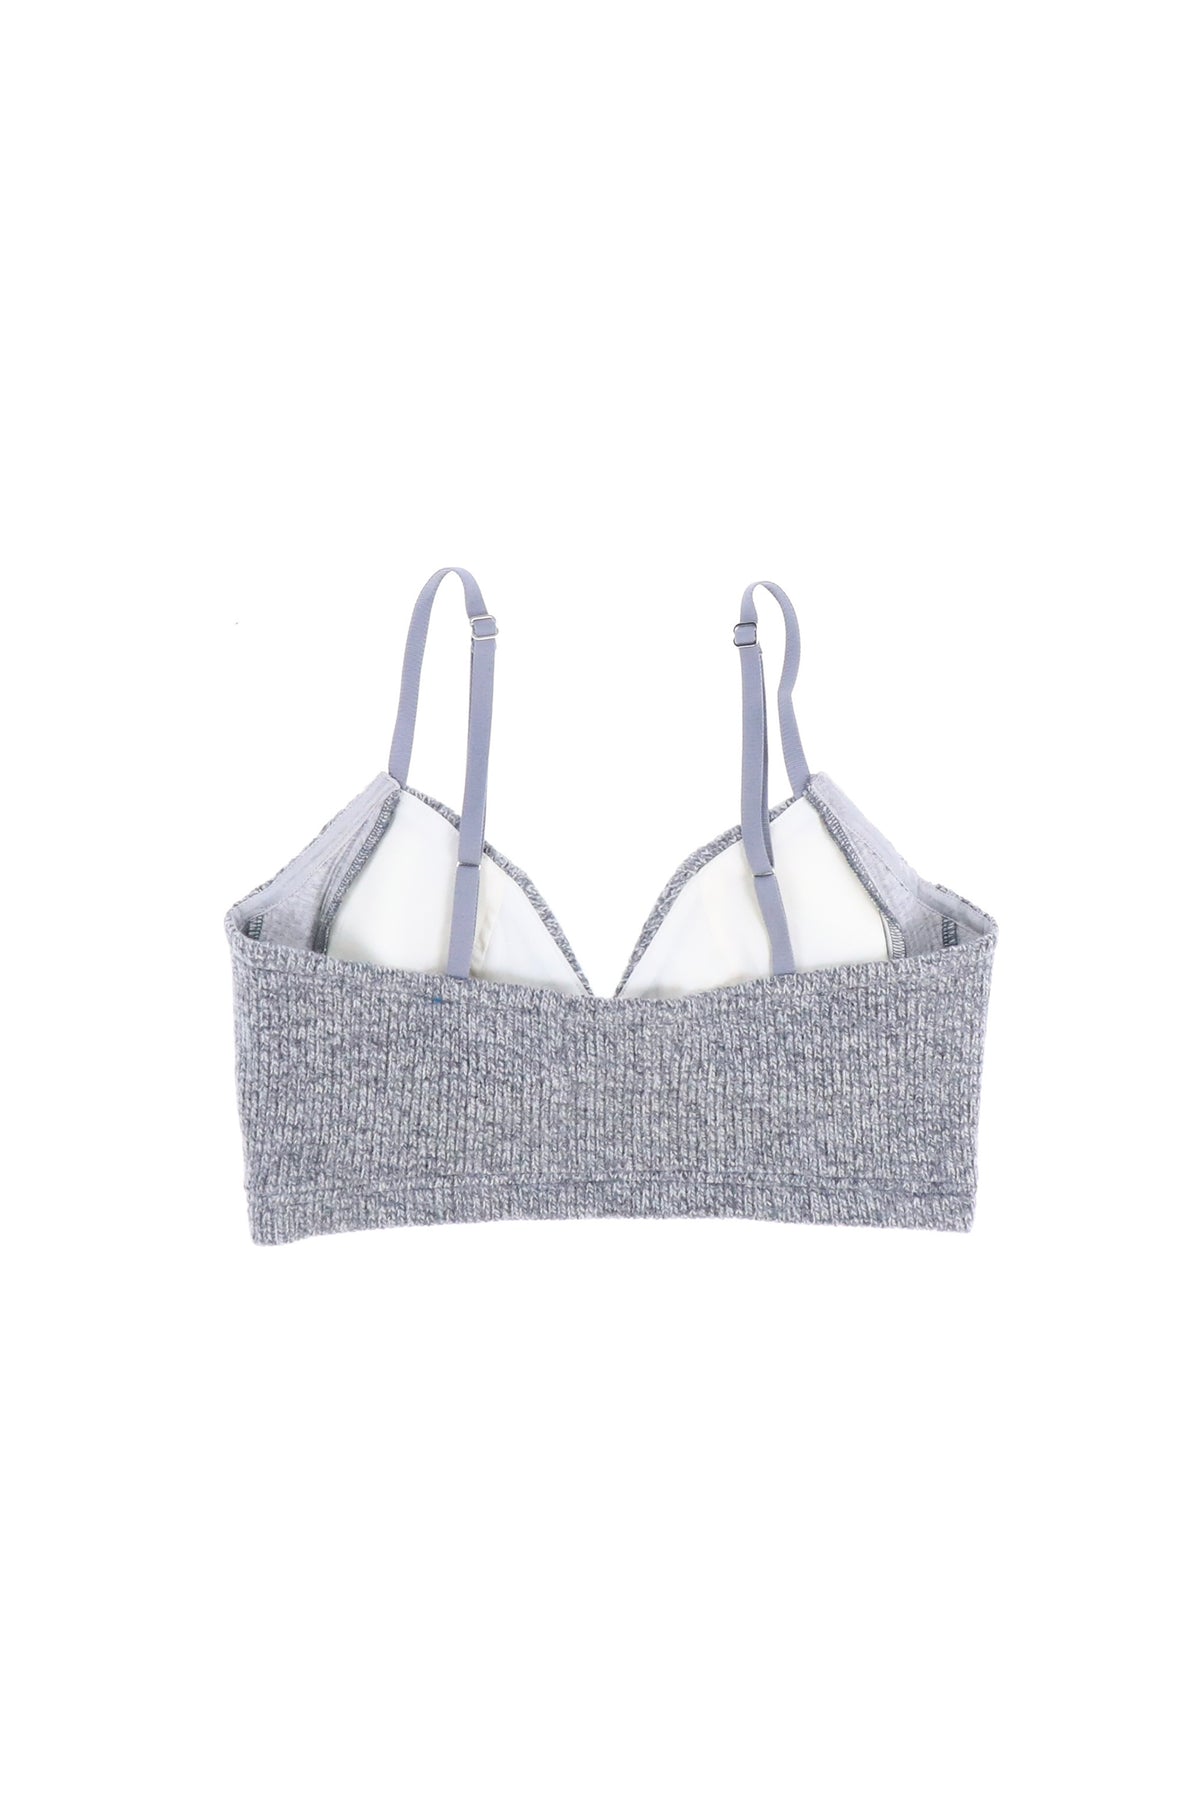 BRALETTE BY KNITTING / GRY